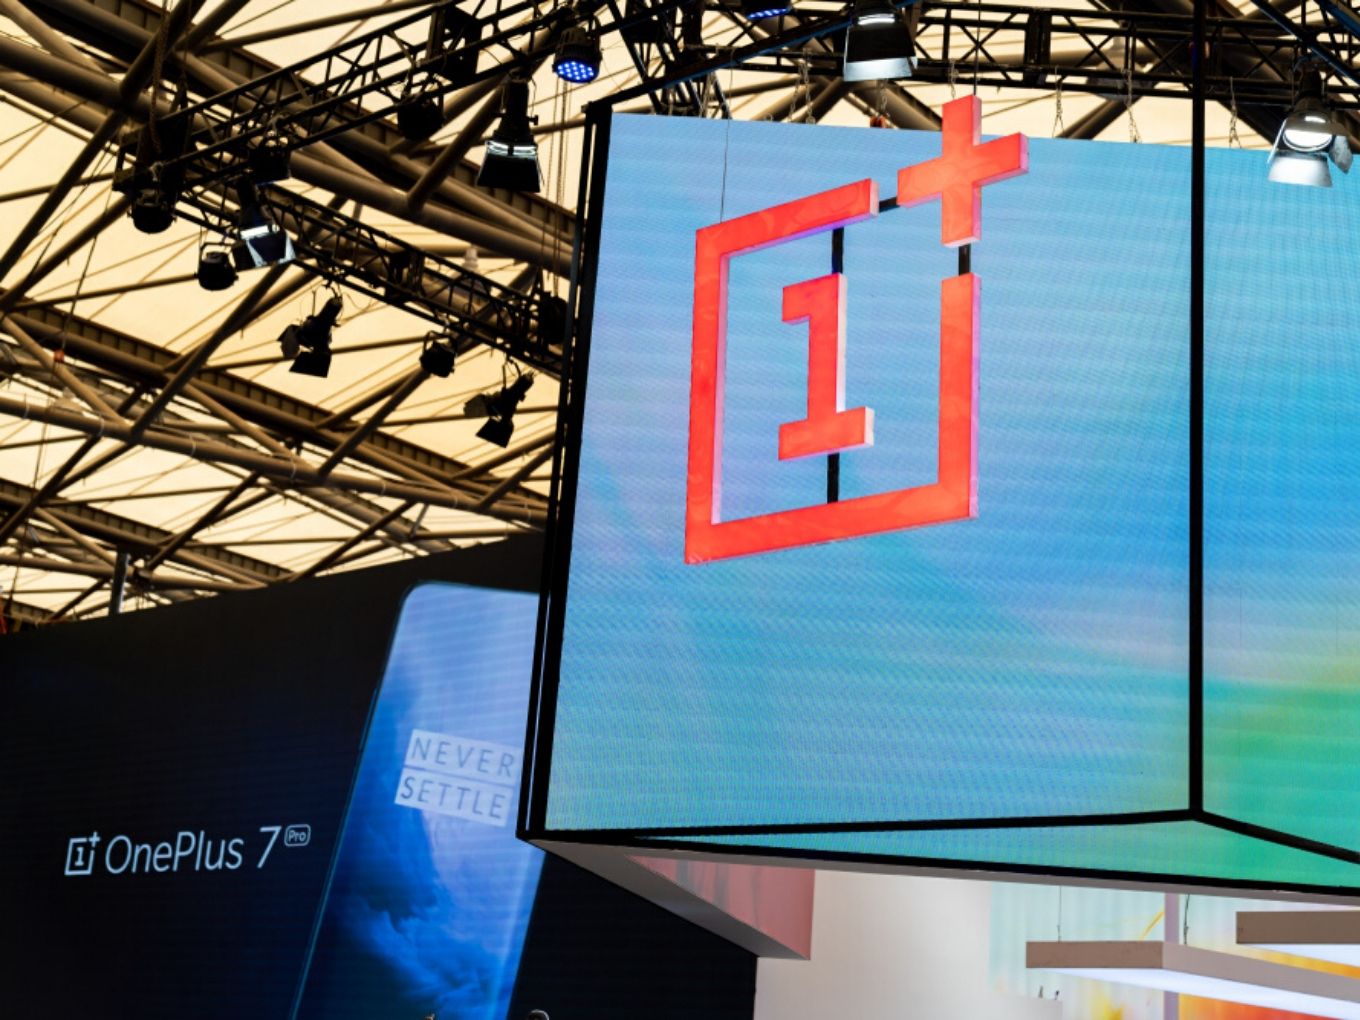 OnePlus Security Breach Impacted Data Of 3K Indian Users: CERT-In